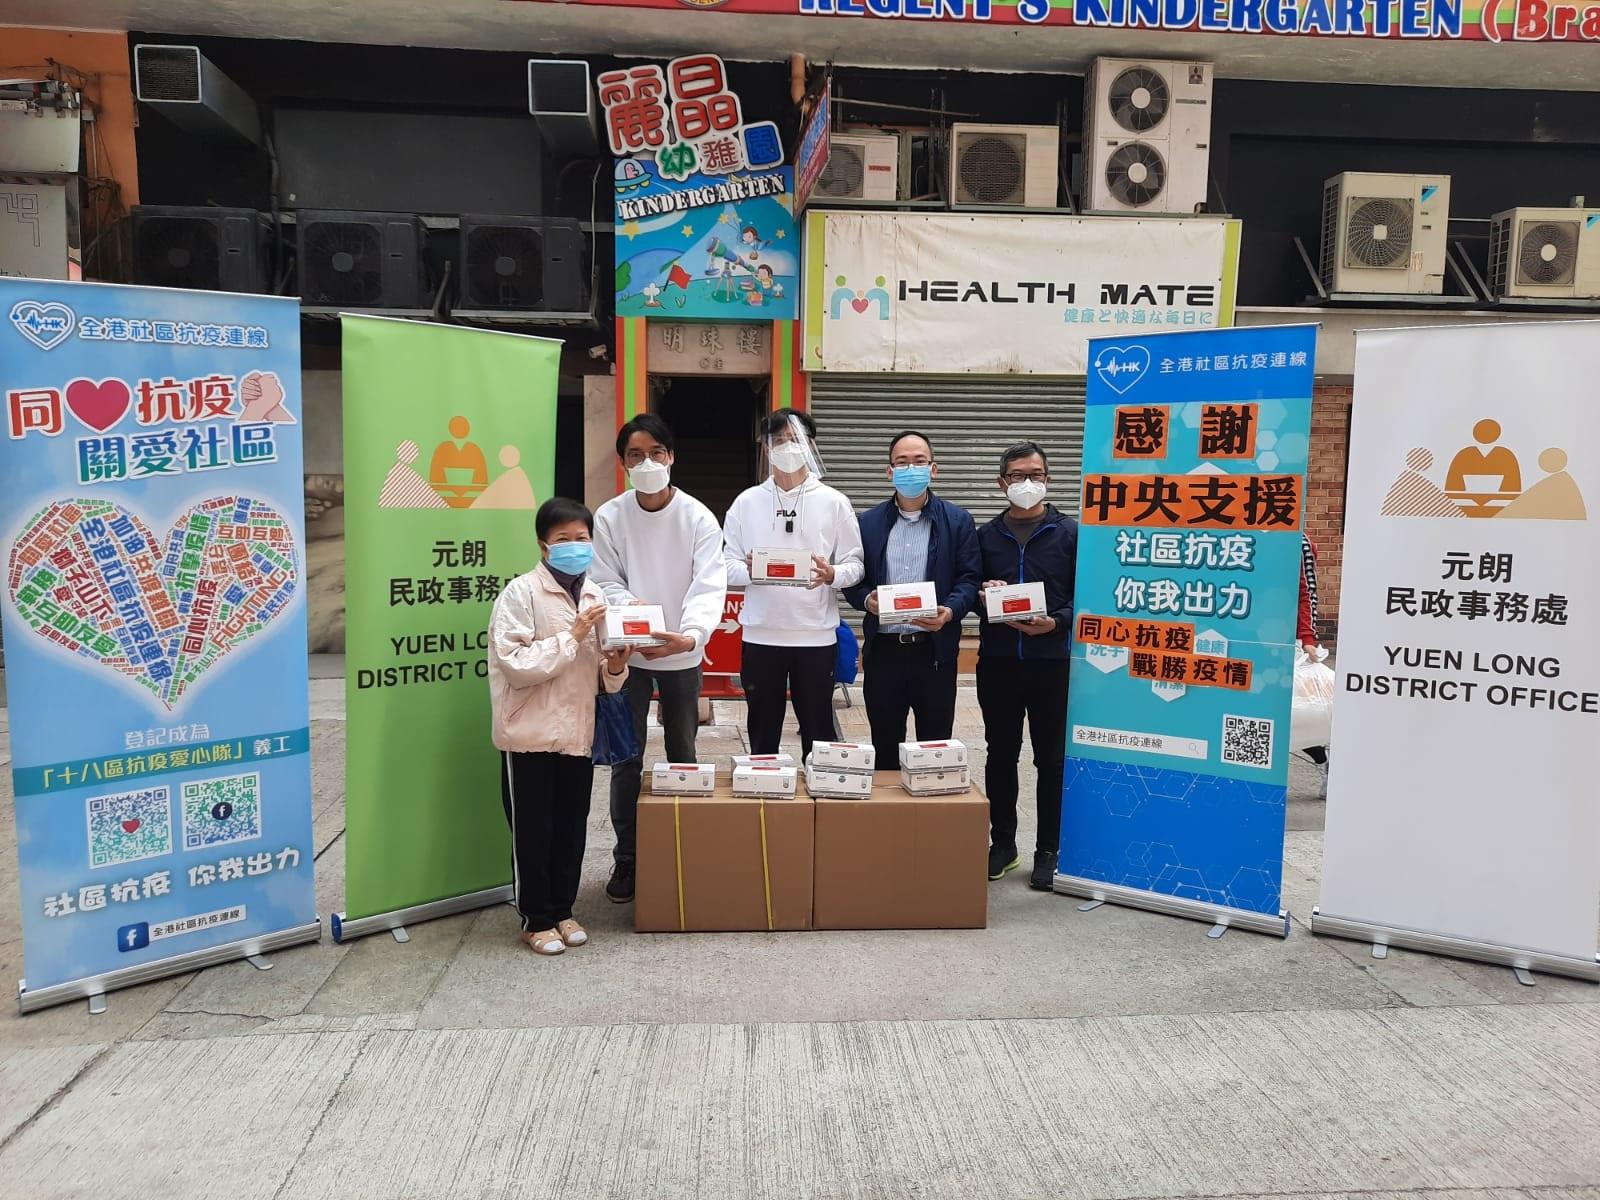 The Yuen Long District Office, together with the Hong Kong Community Anti-Coronavirus Link, distributed COVID-19 rapid test kits to residents in Yuen Long District at Shui Che Kwun Lane in Yuen Long on February 27.

